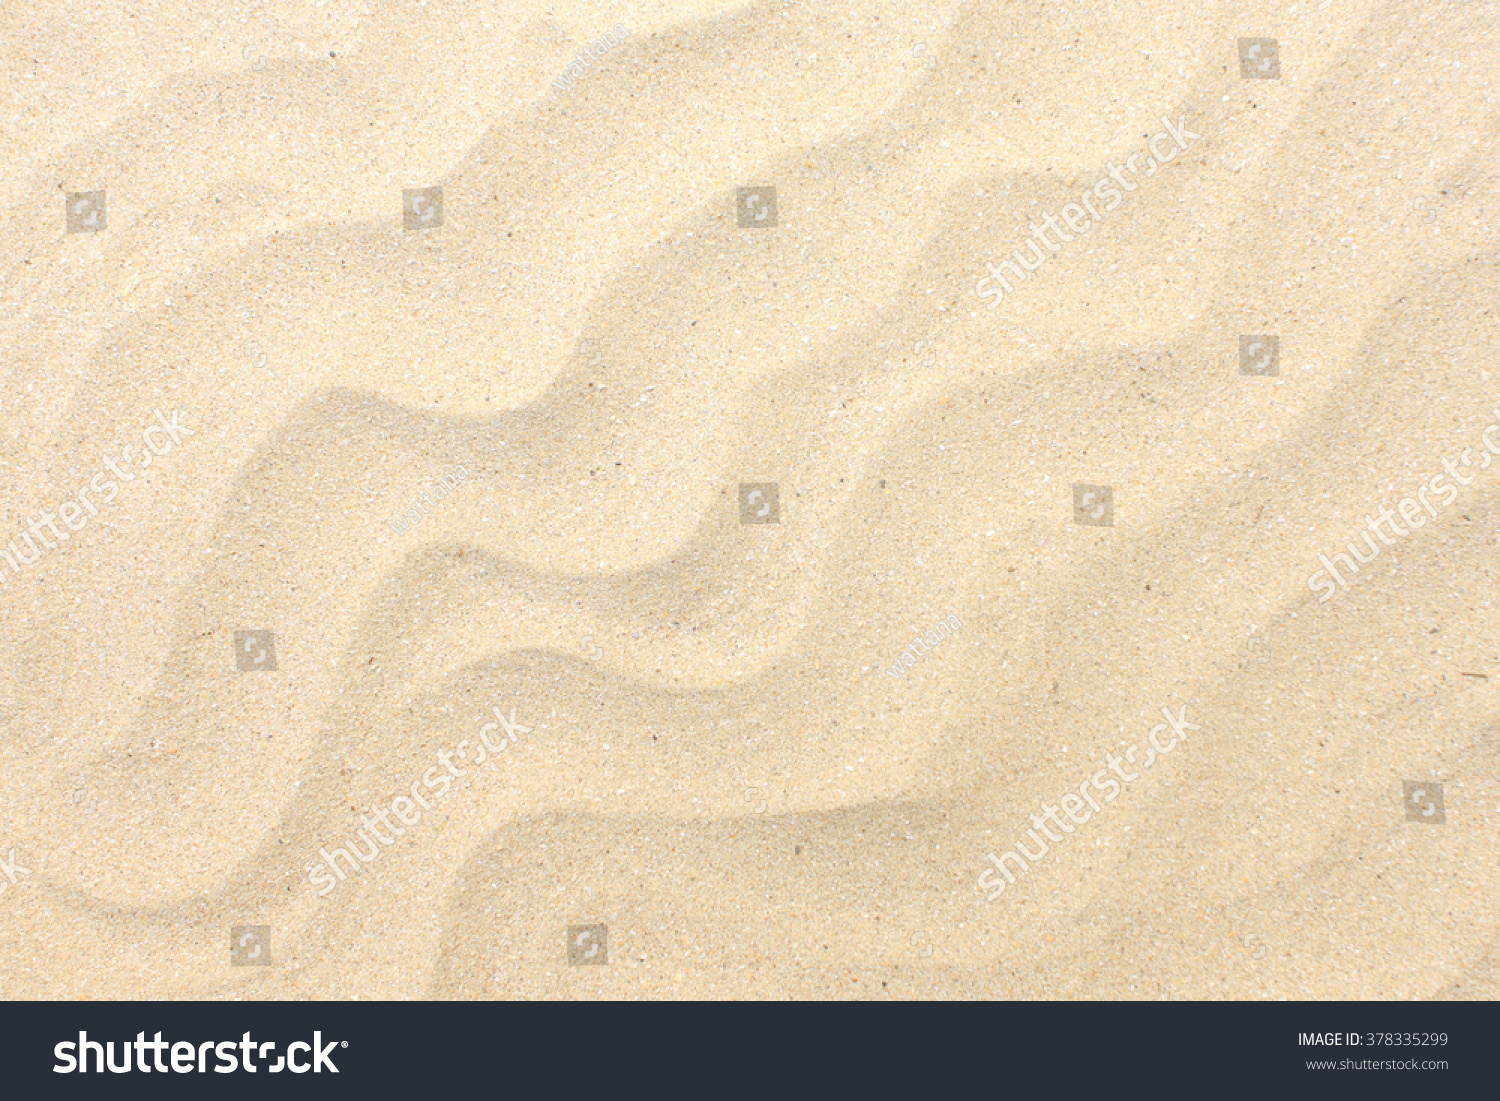 Sand texture. Sandy beach for background. Top view #378335299